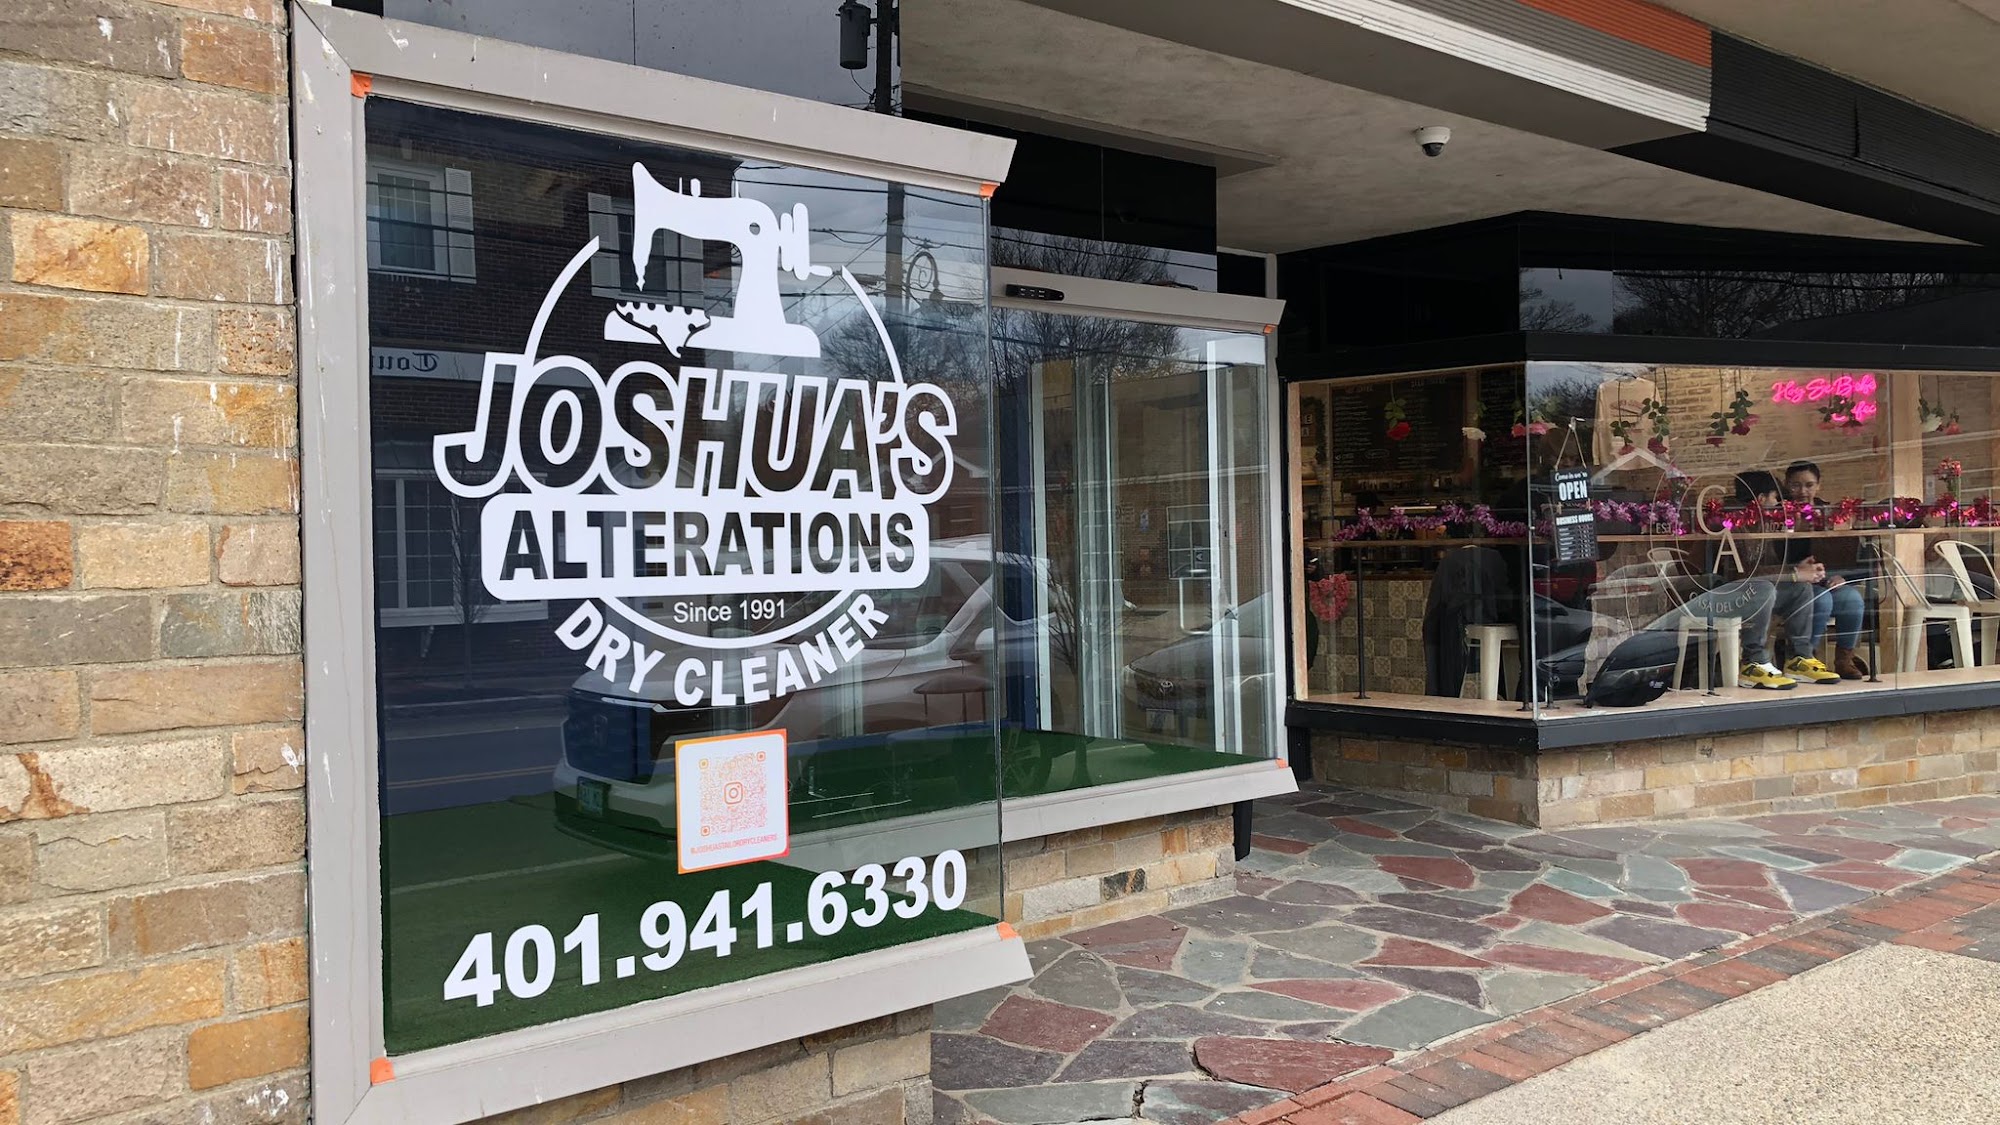 Joshua’s tailors and drycleaners